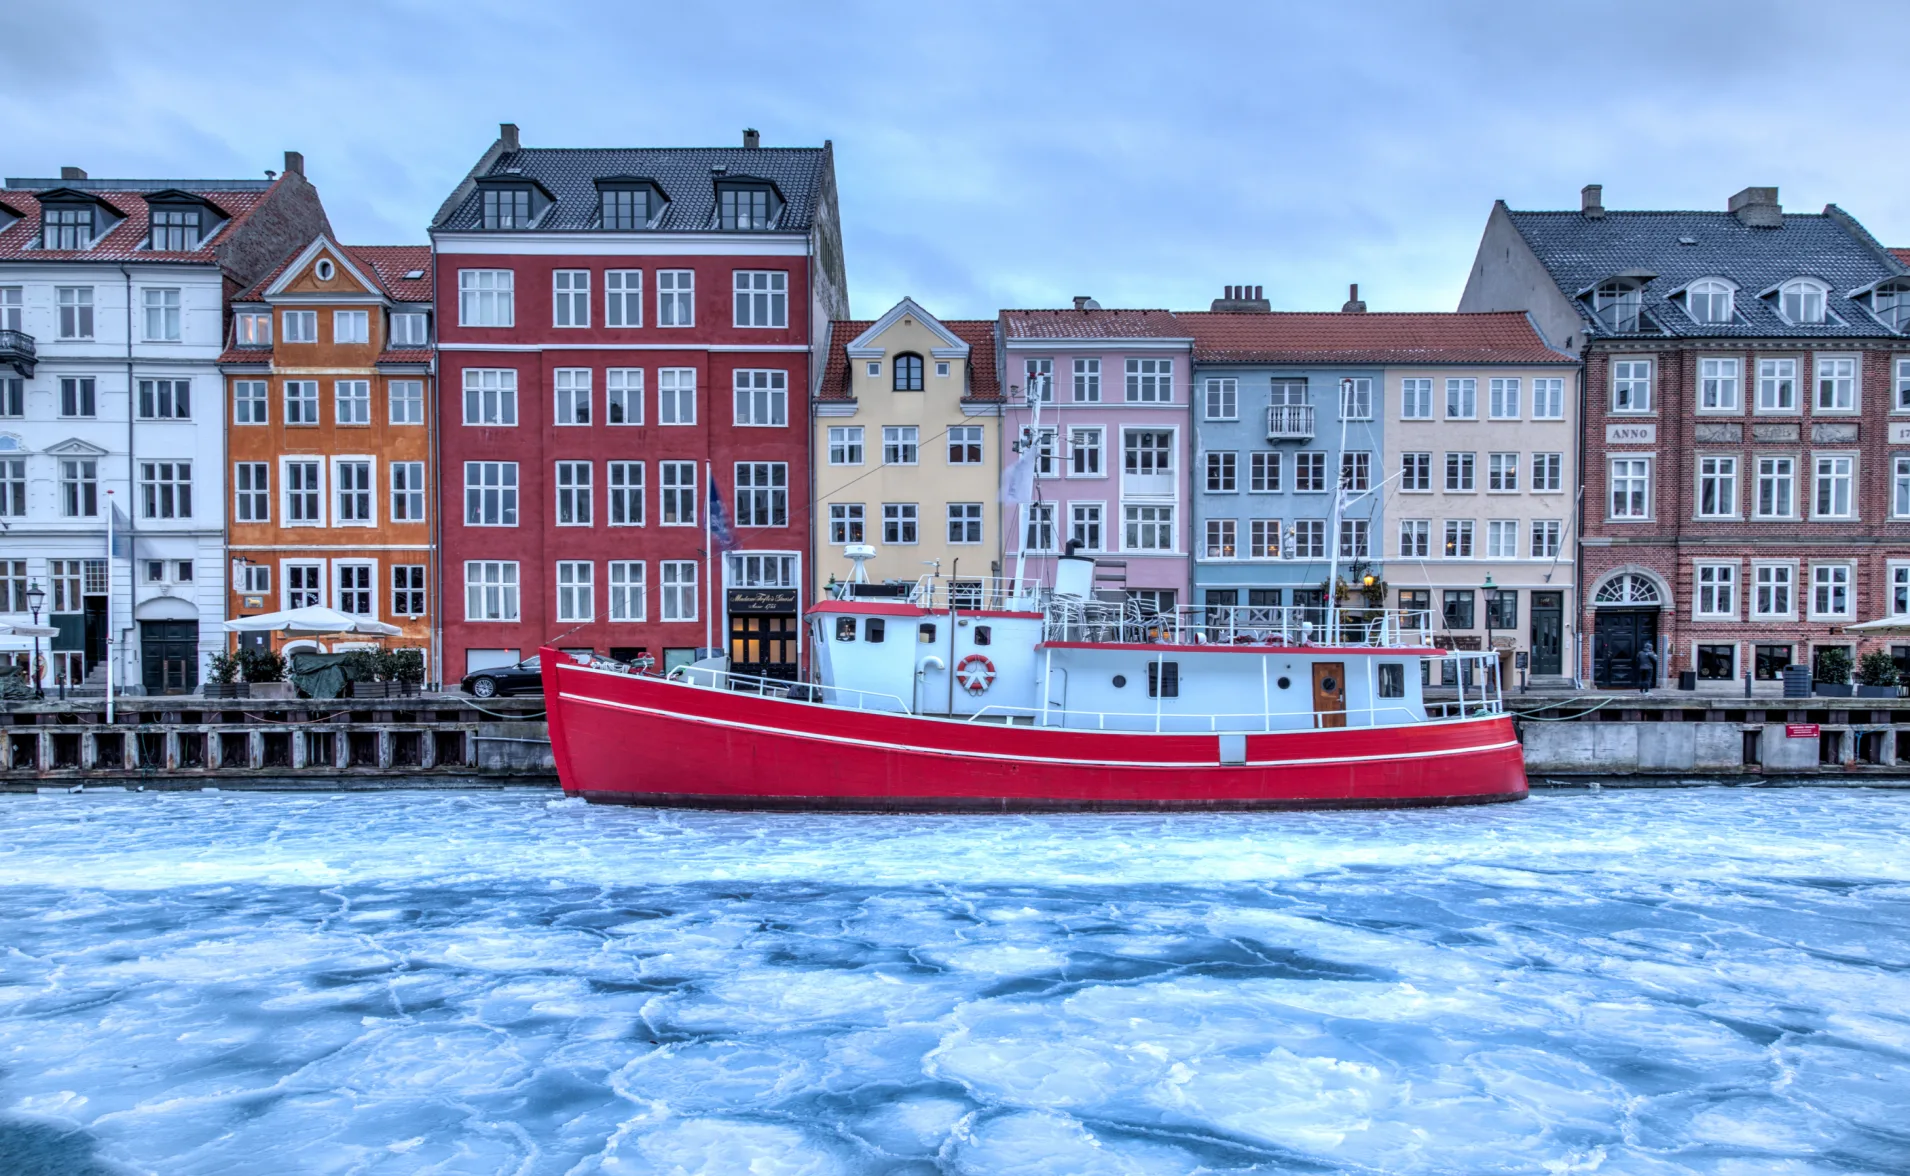 A Red Barge on an Icy Canal in Copenhagen